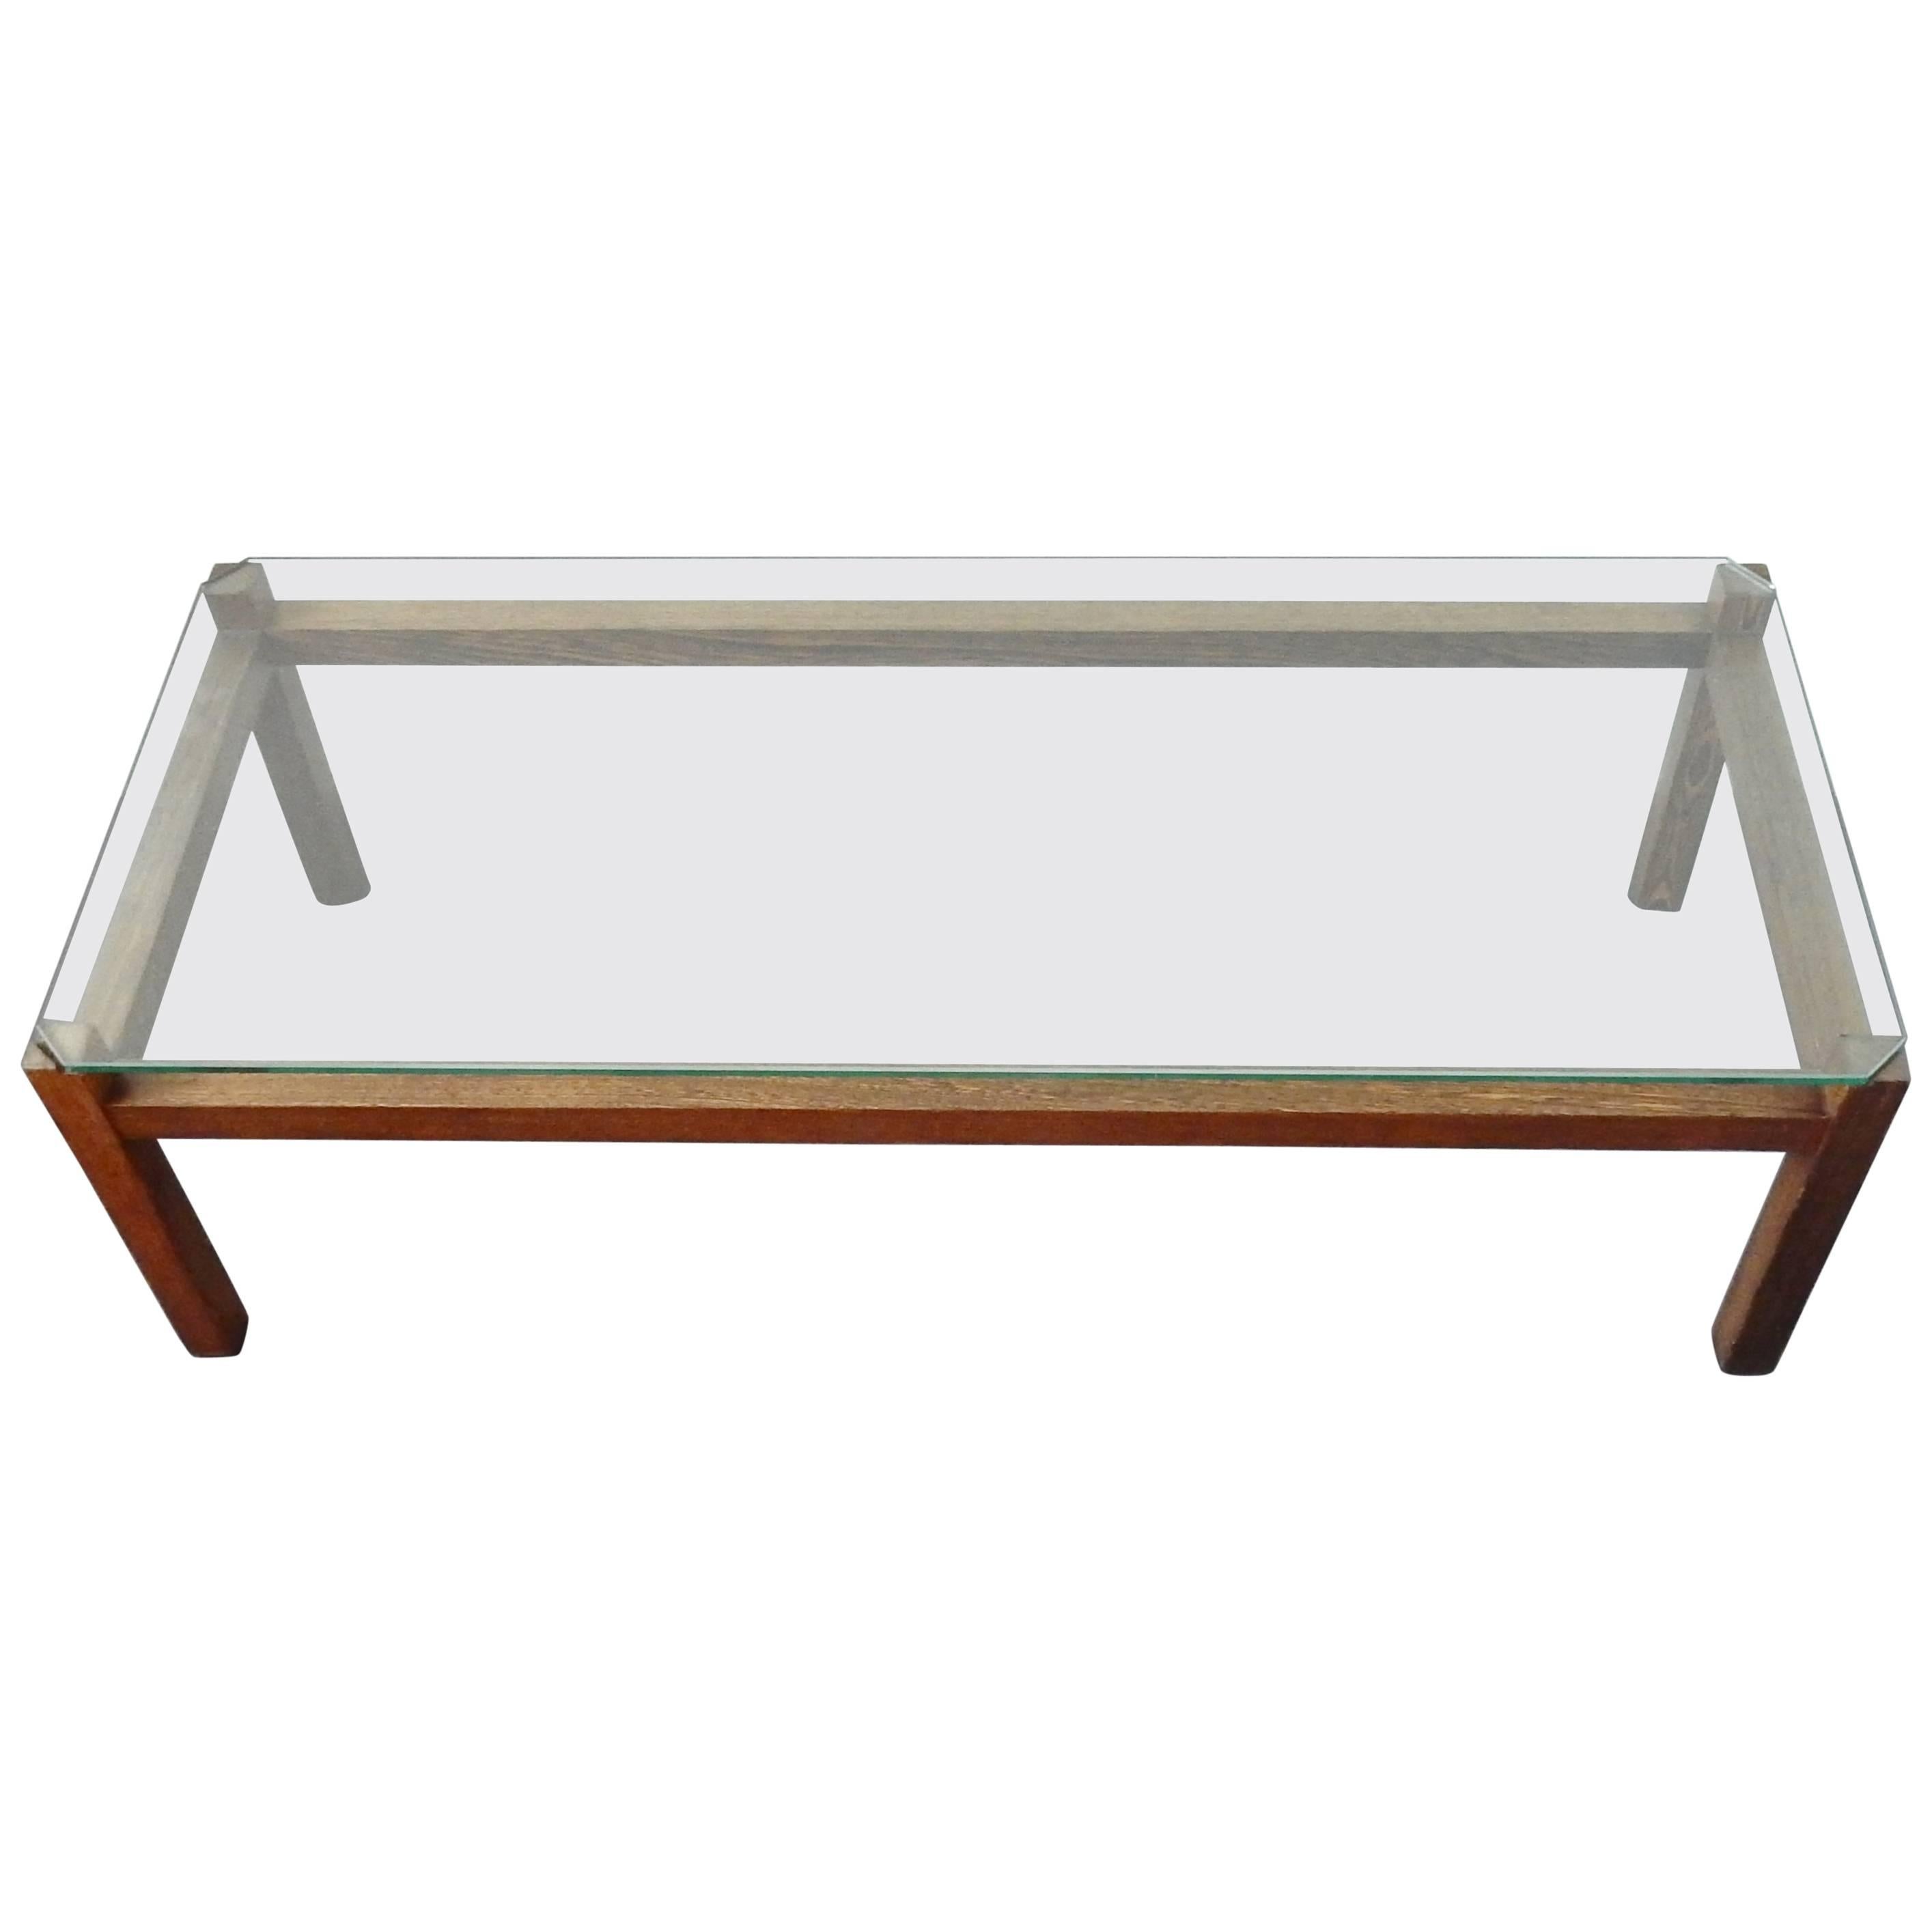 Model 'Langerak' Coffee Table by Kho Liang for 't Spectrum. Netherlands, 1960s For Sale